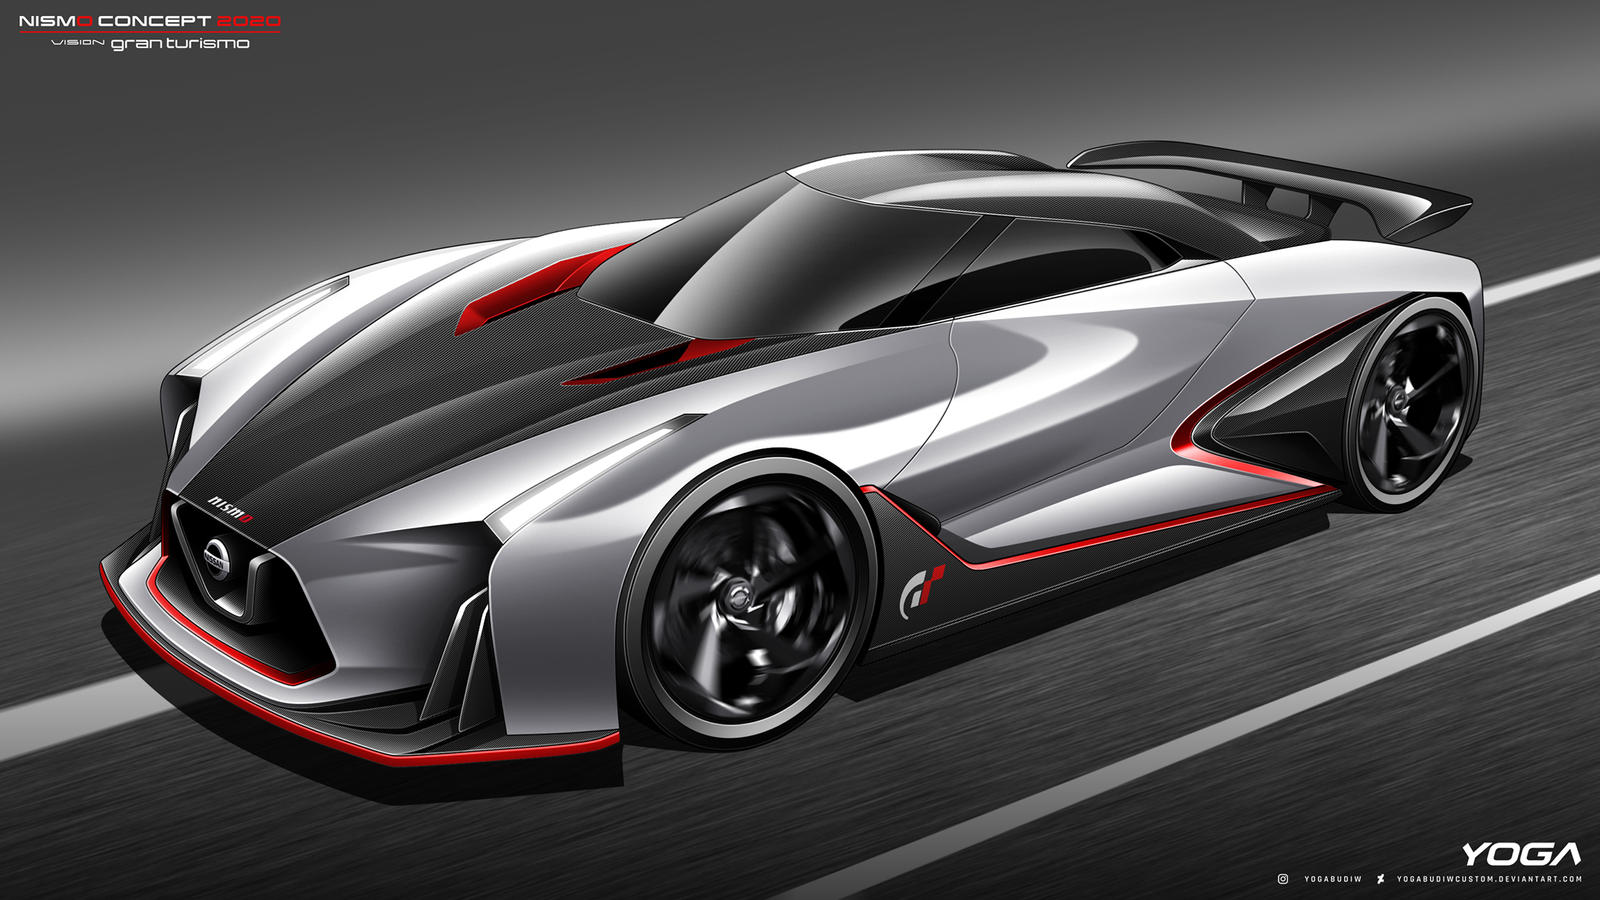 Nissan R36 GTR Nismo concept by wizzoo7